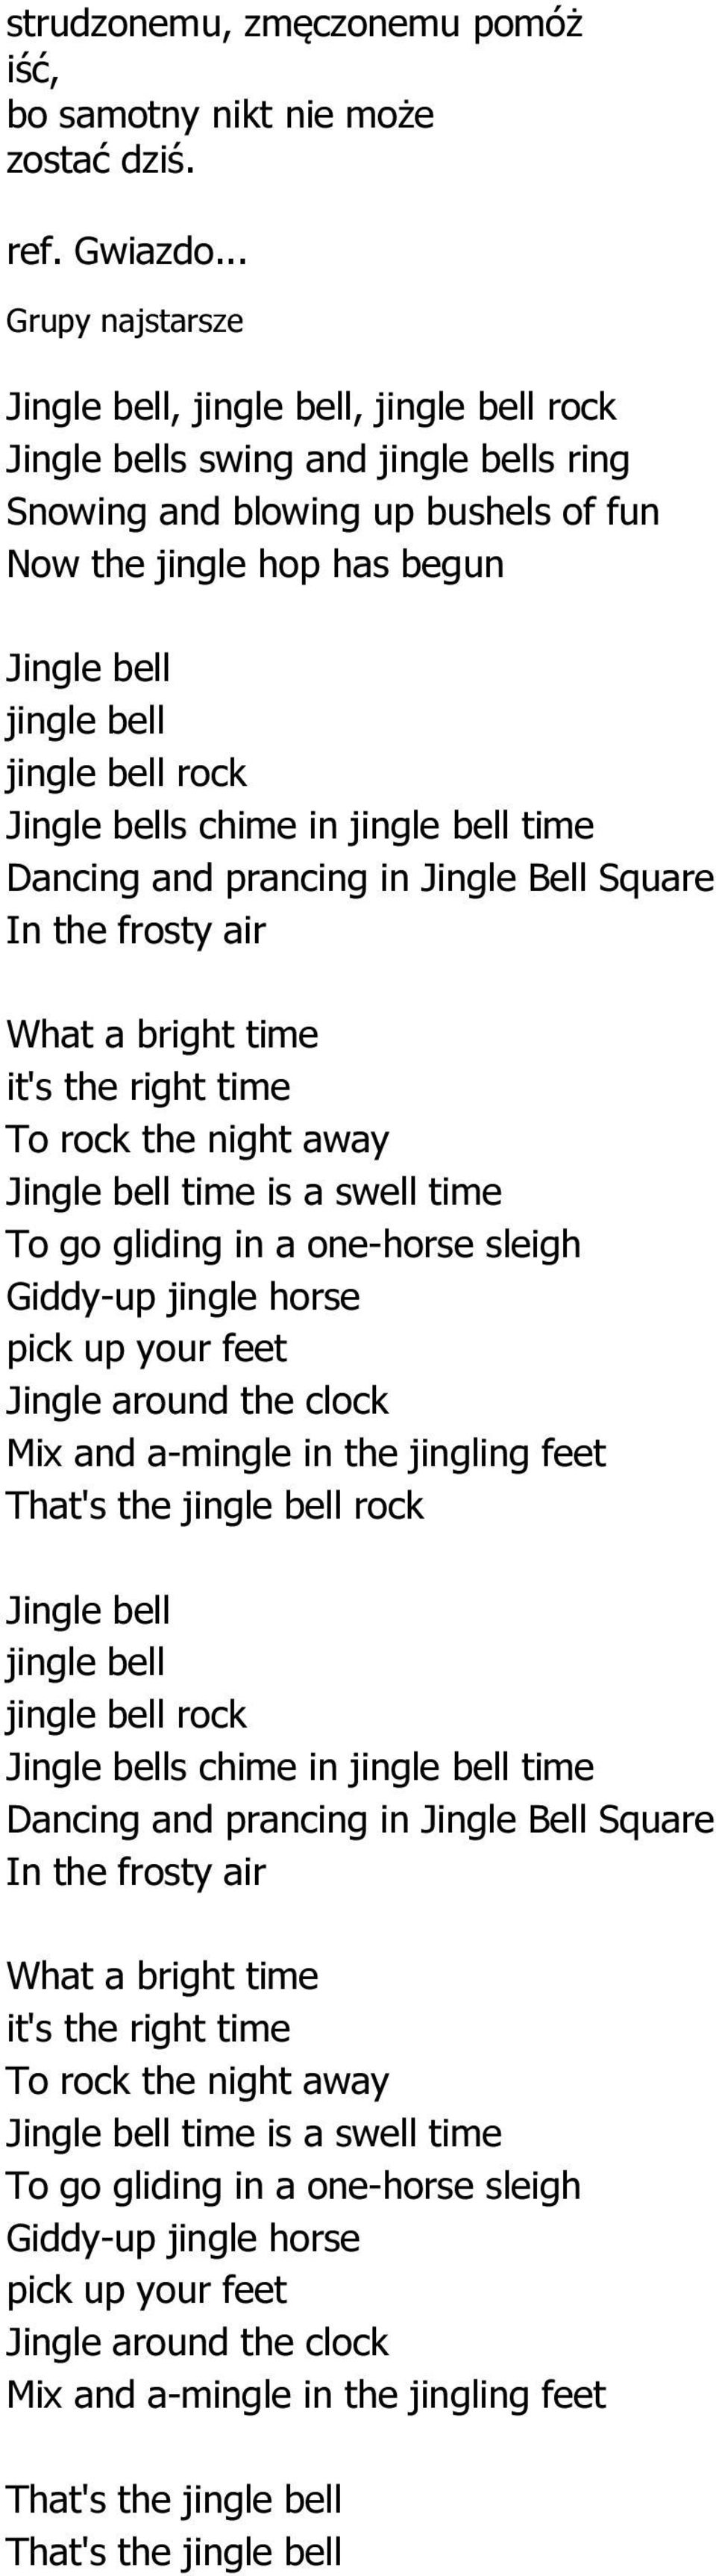 jingle bell rock Jingle bells chime in jingle bell time Dancing and prancing in Jingle Bell Square In the frosty air What a bright time it's the right time To rock the night away Jingle bell time is